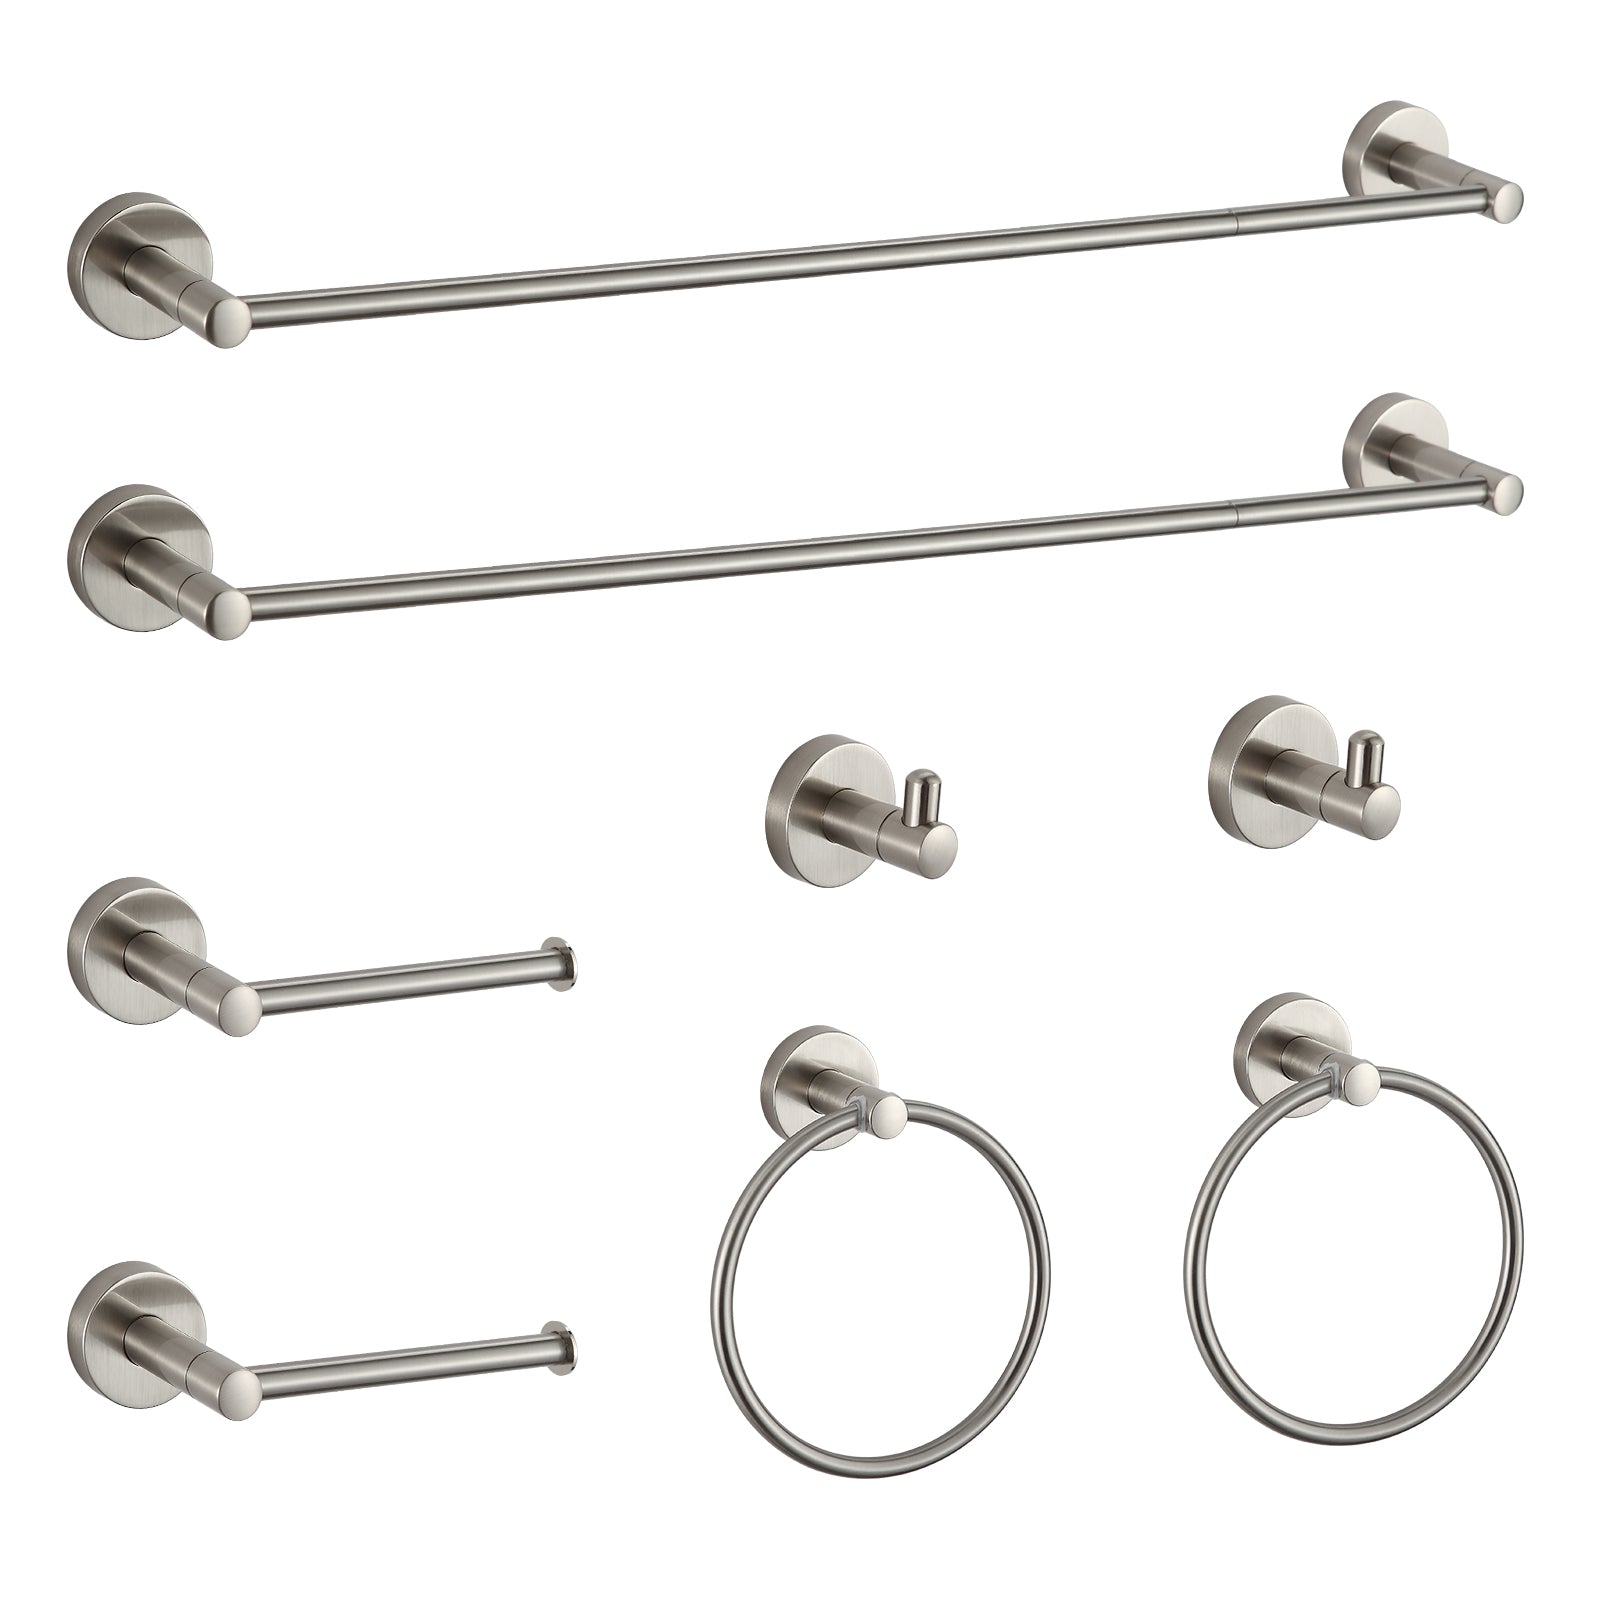 BGL Bathroom Accessories Set, Expandable Brushed Nickel 4-Piece Towel Bar  Set Hardware Wall Mounted